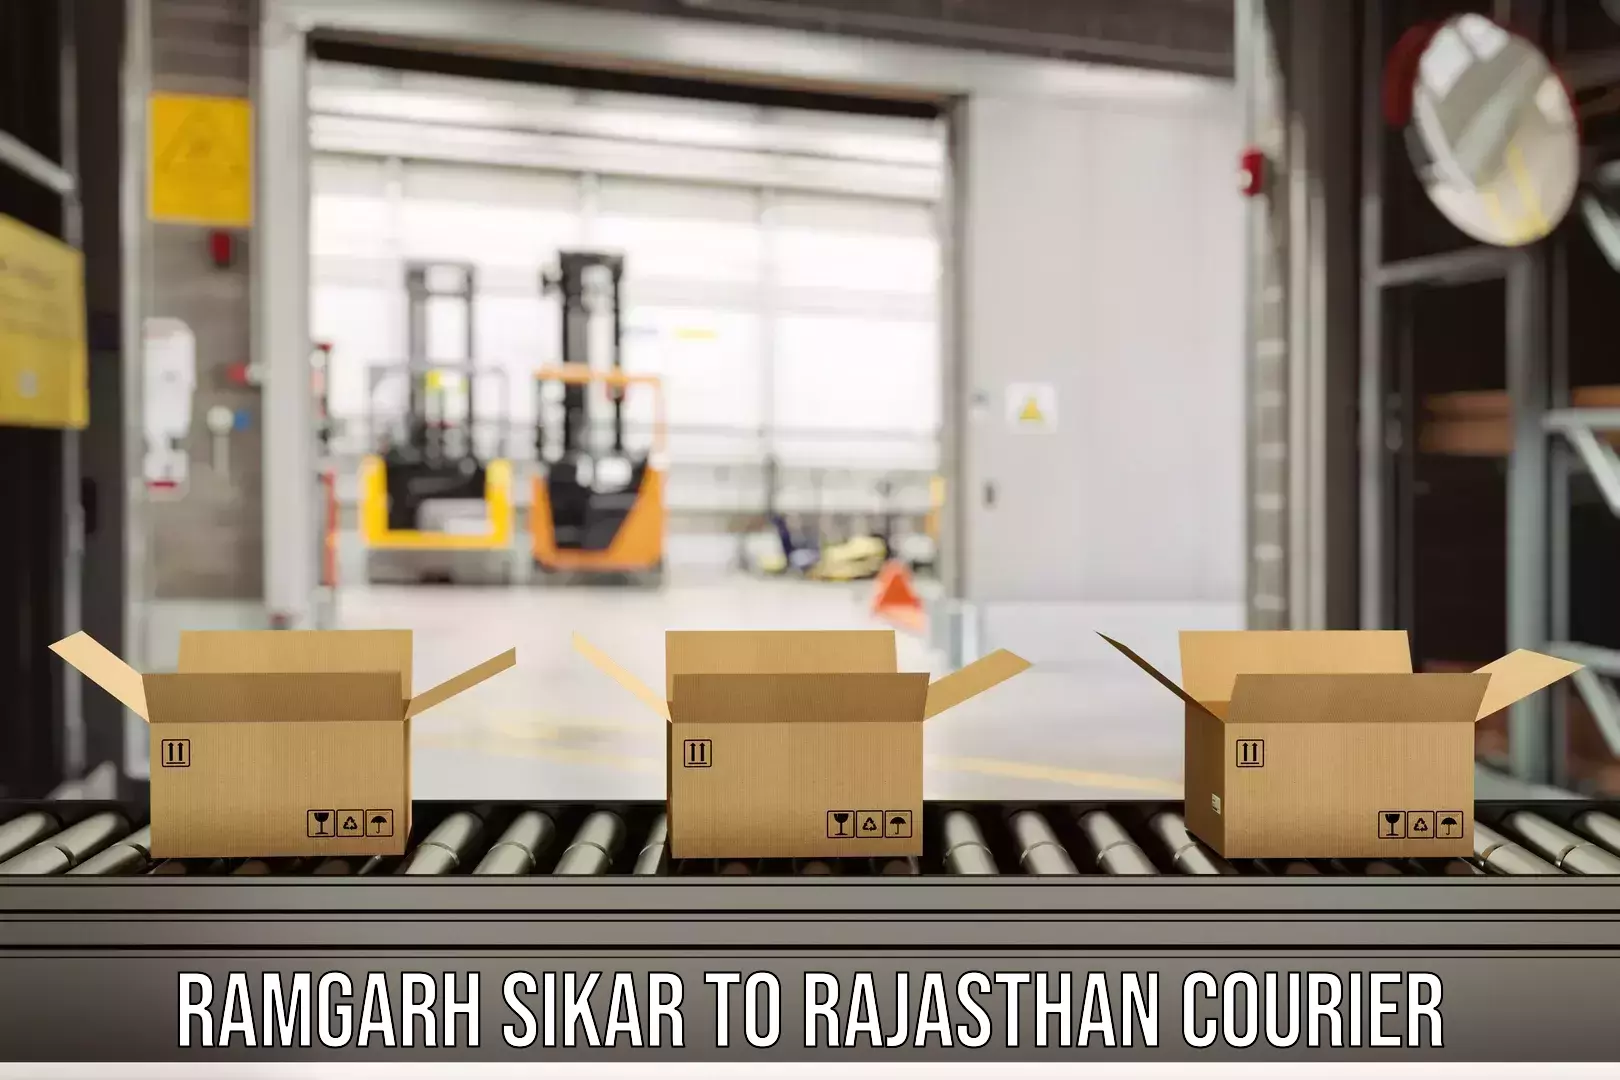 Global courier networks Ramgarh Sikar to Bhinder